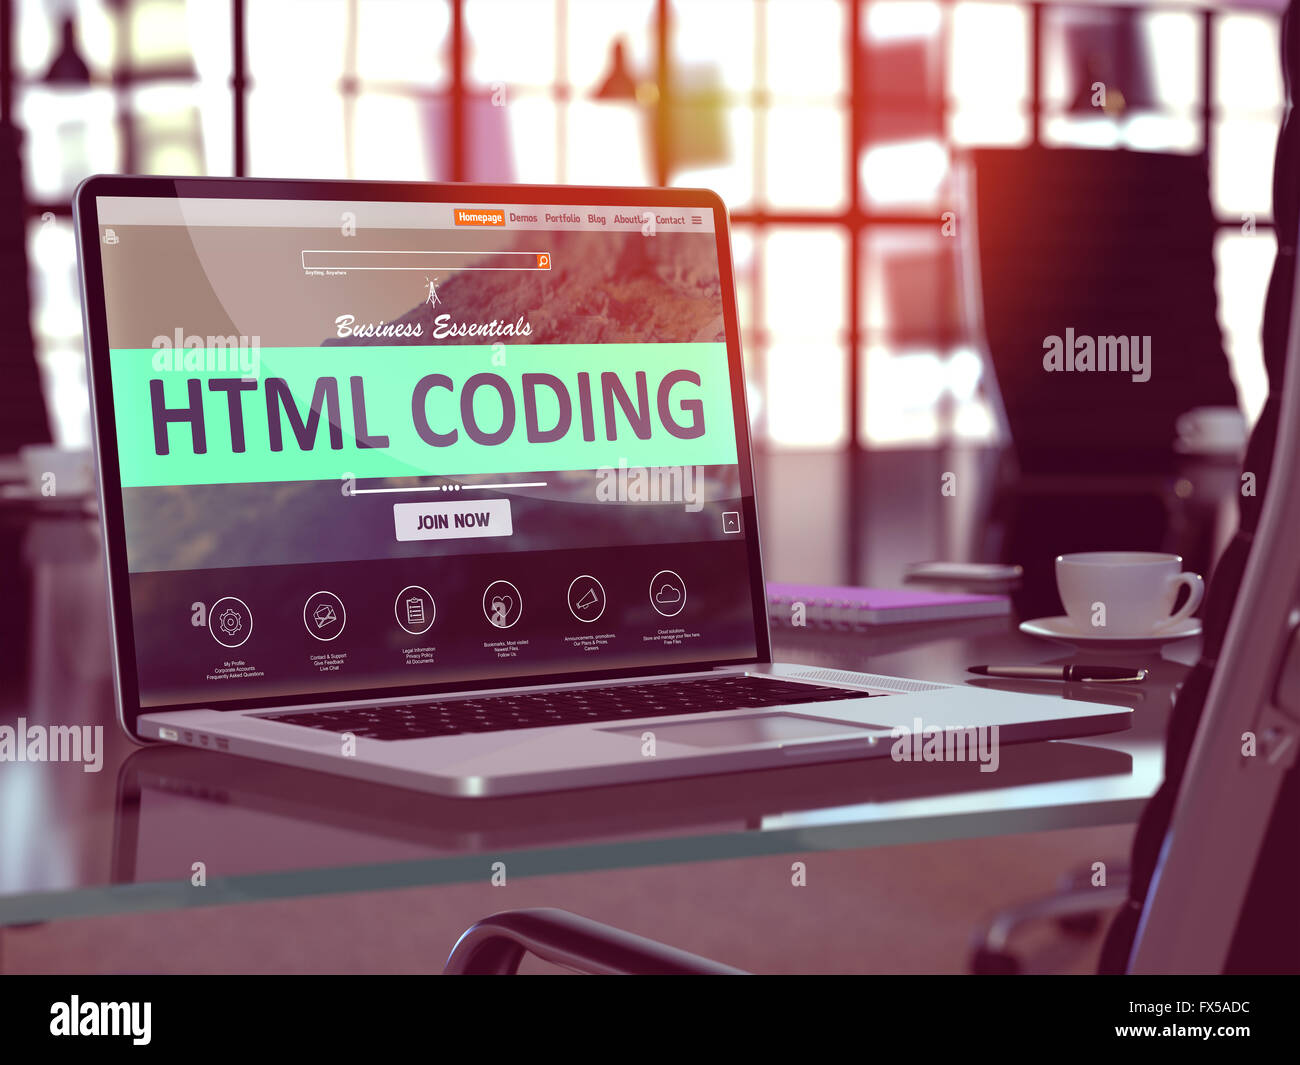 Html Coding Concept on Laptop Screen. Stock Photo